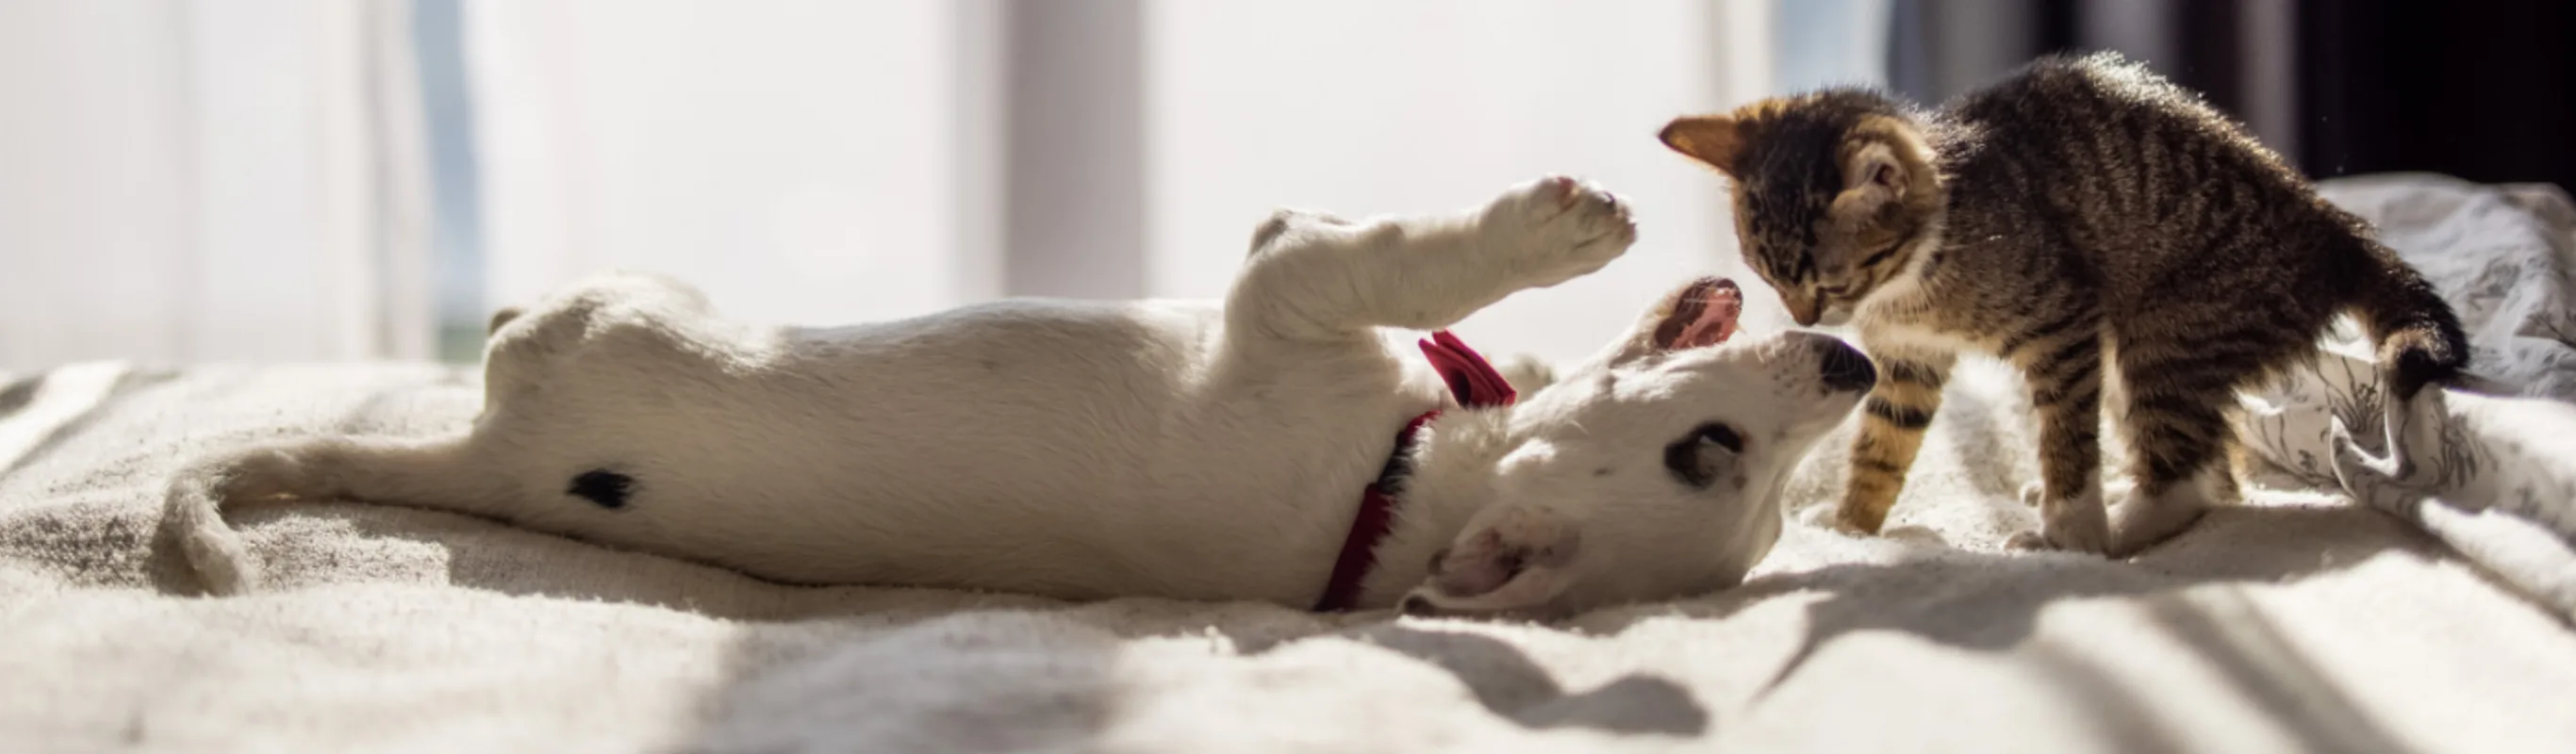 Dog and Kitten Playing on a Bed